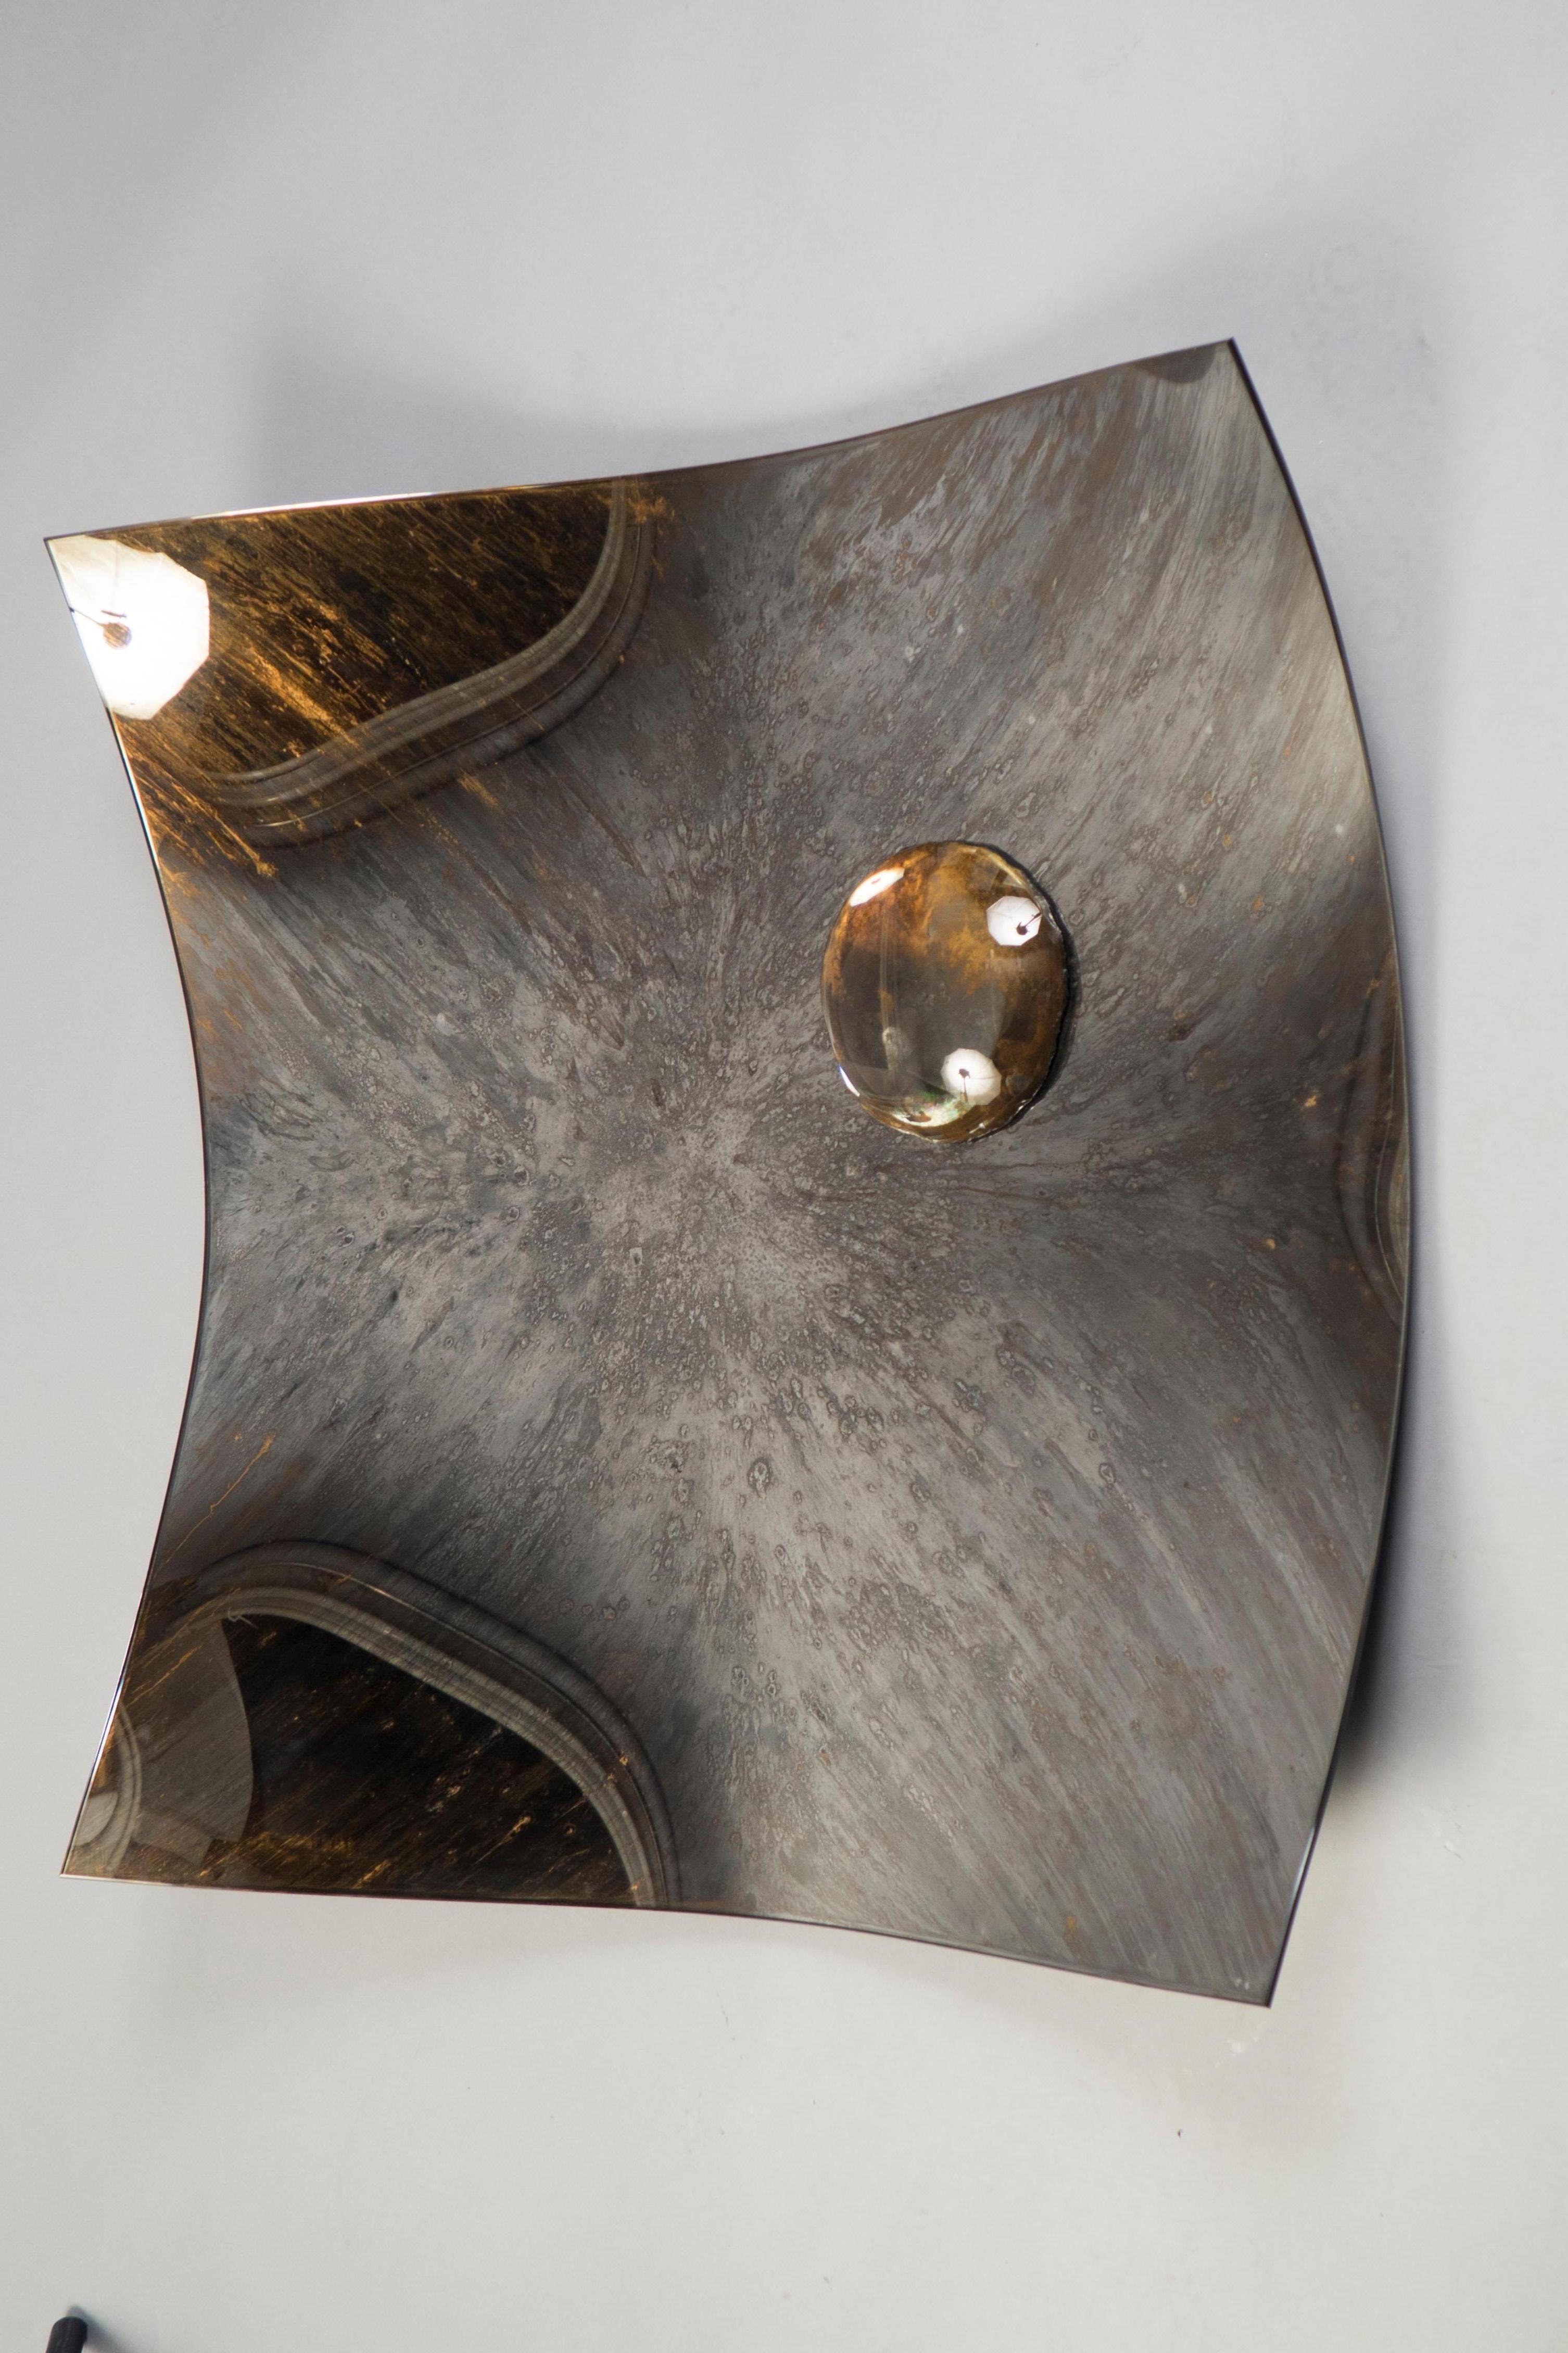 Slightly concave square mirror plate, composed of a gray base color glass with a lighter contrasting color added to create a diffuse-pattern patina. A golden-gray orb rests off-centre.